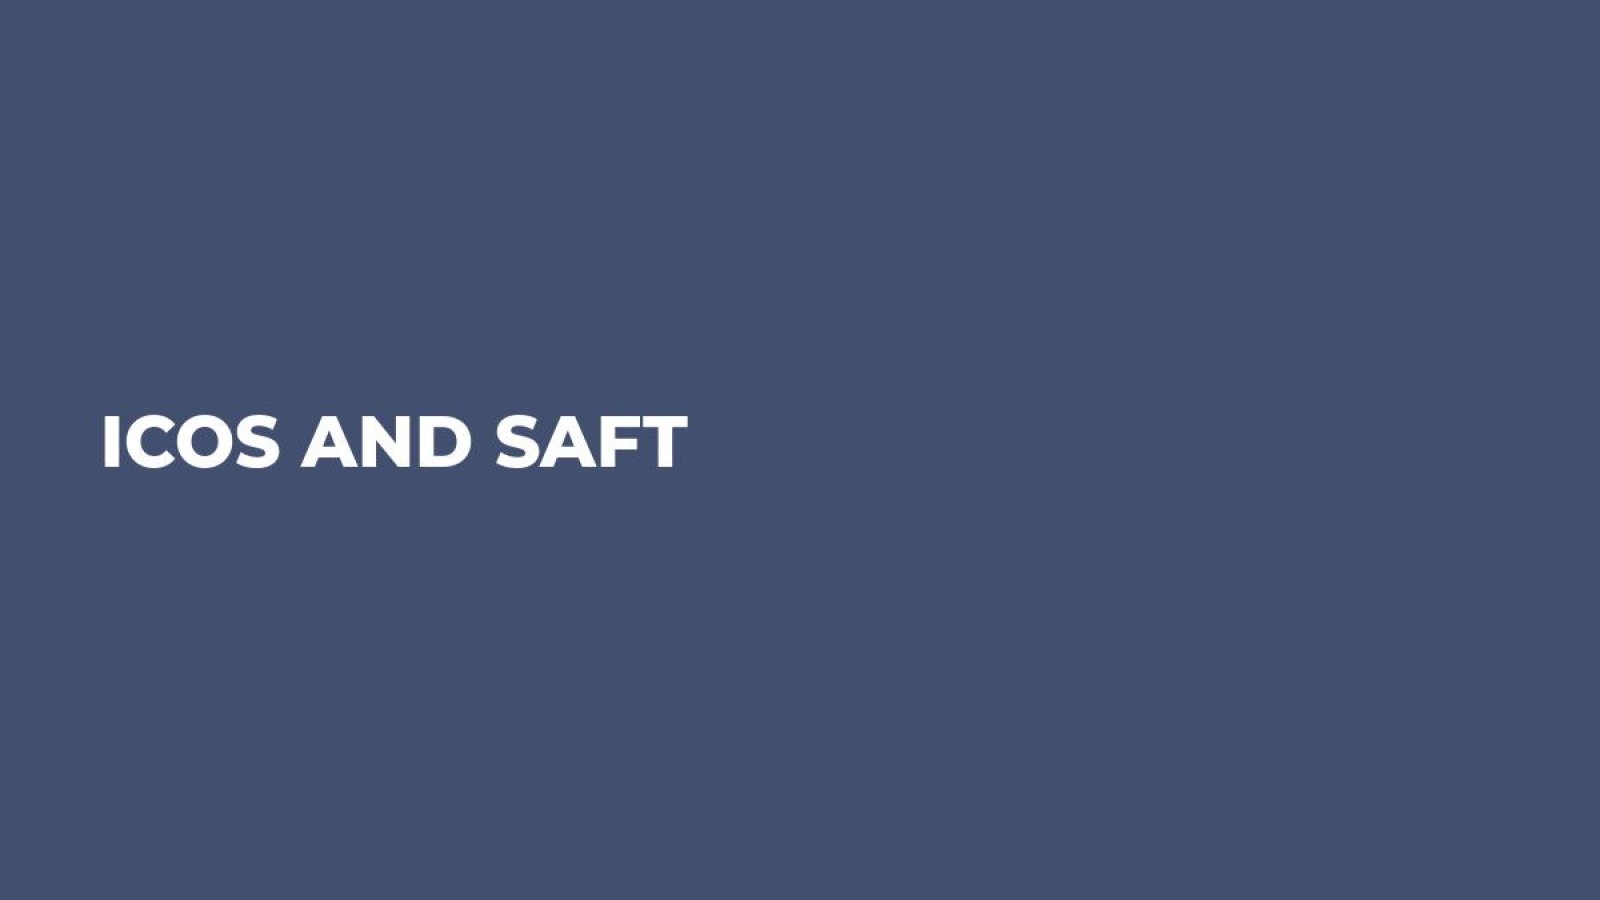 ICOs and SAFT